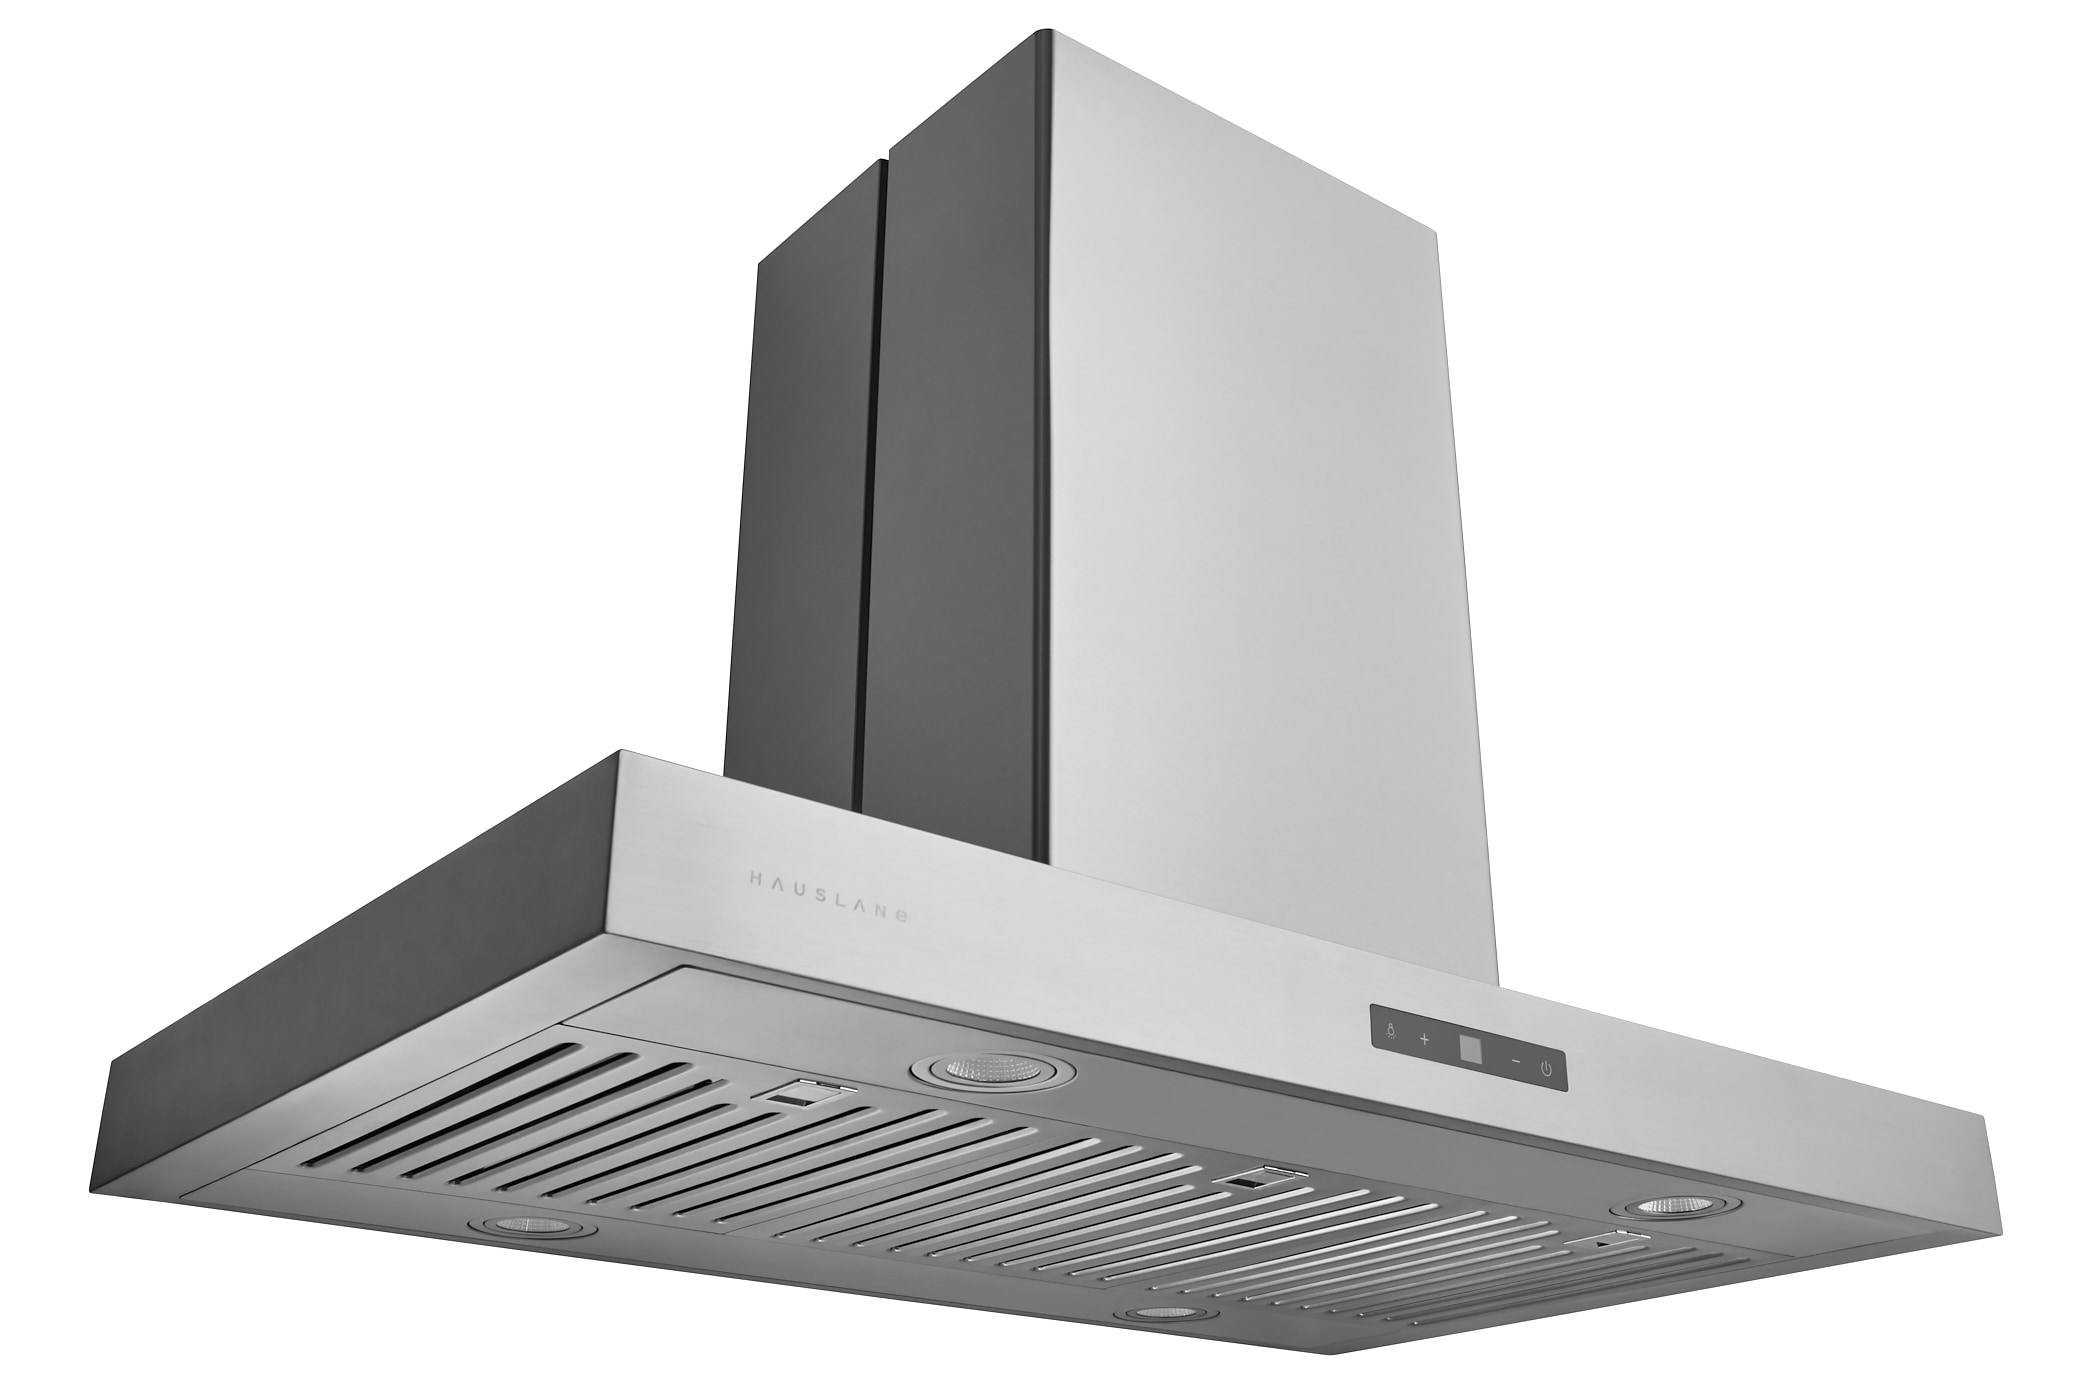  Hauslane, Chef Series Range Hood R100 30 Built-In/Recessed  Stove Hood, Compact Stainless Steel, 3 Speed Kitchen Exhaust Fan with  Light, Dishwasher-Safe Baffle Filter